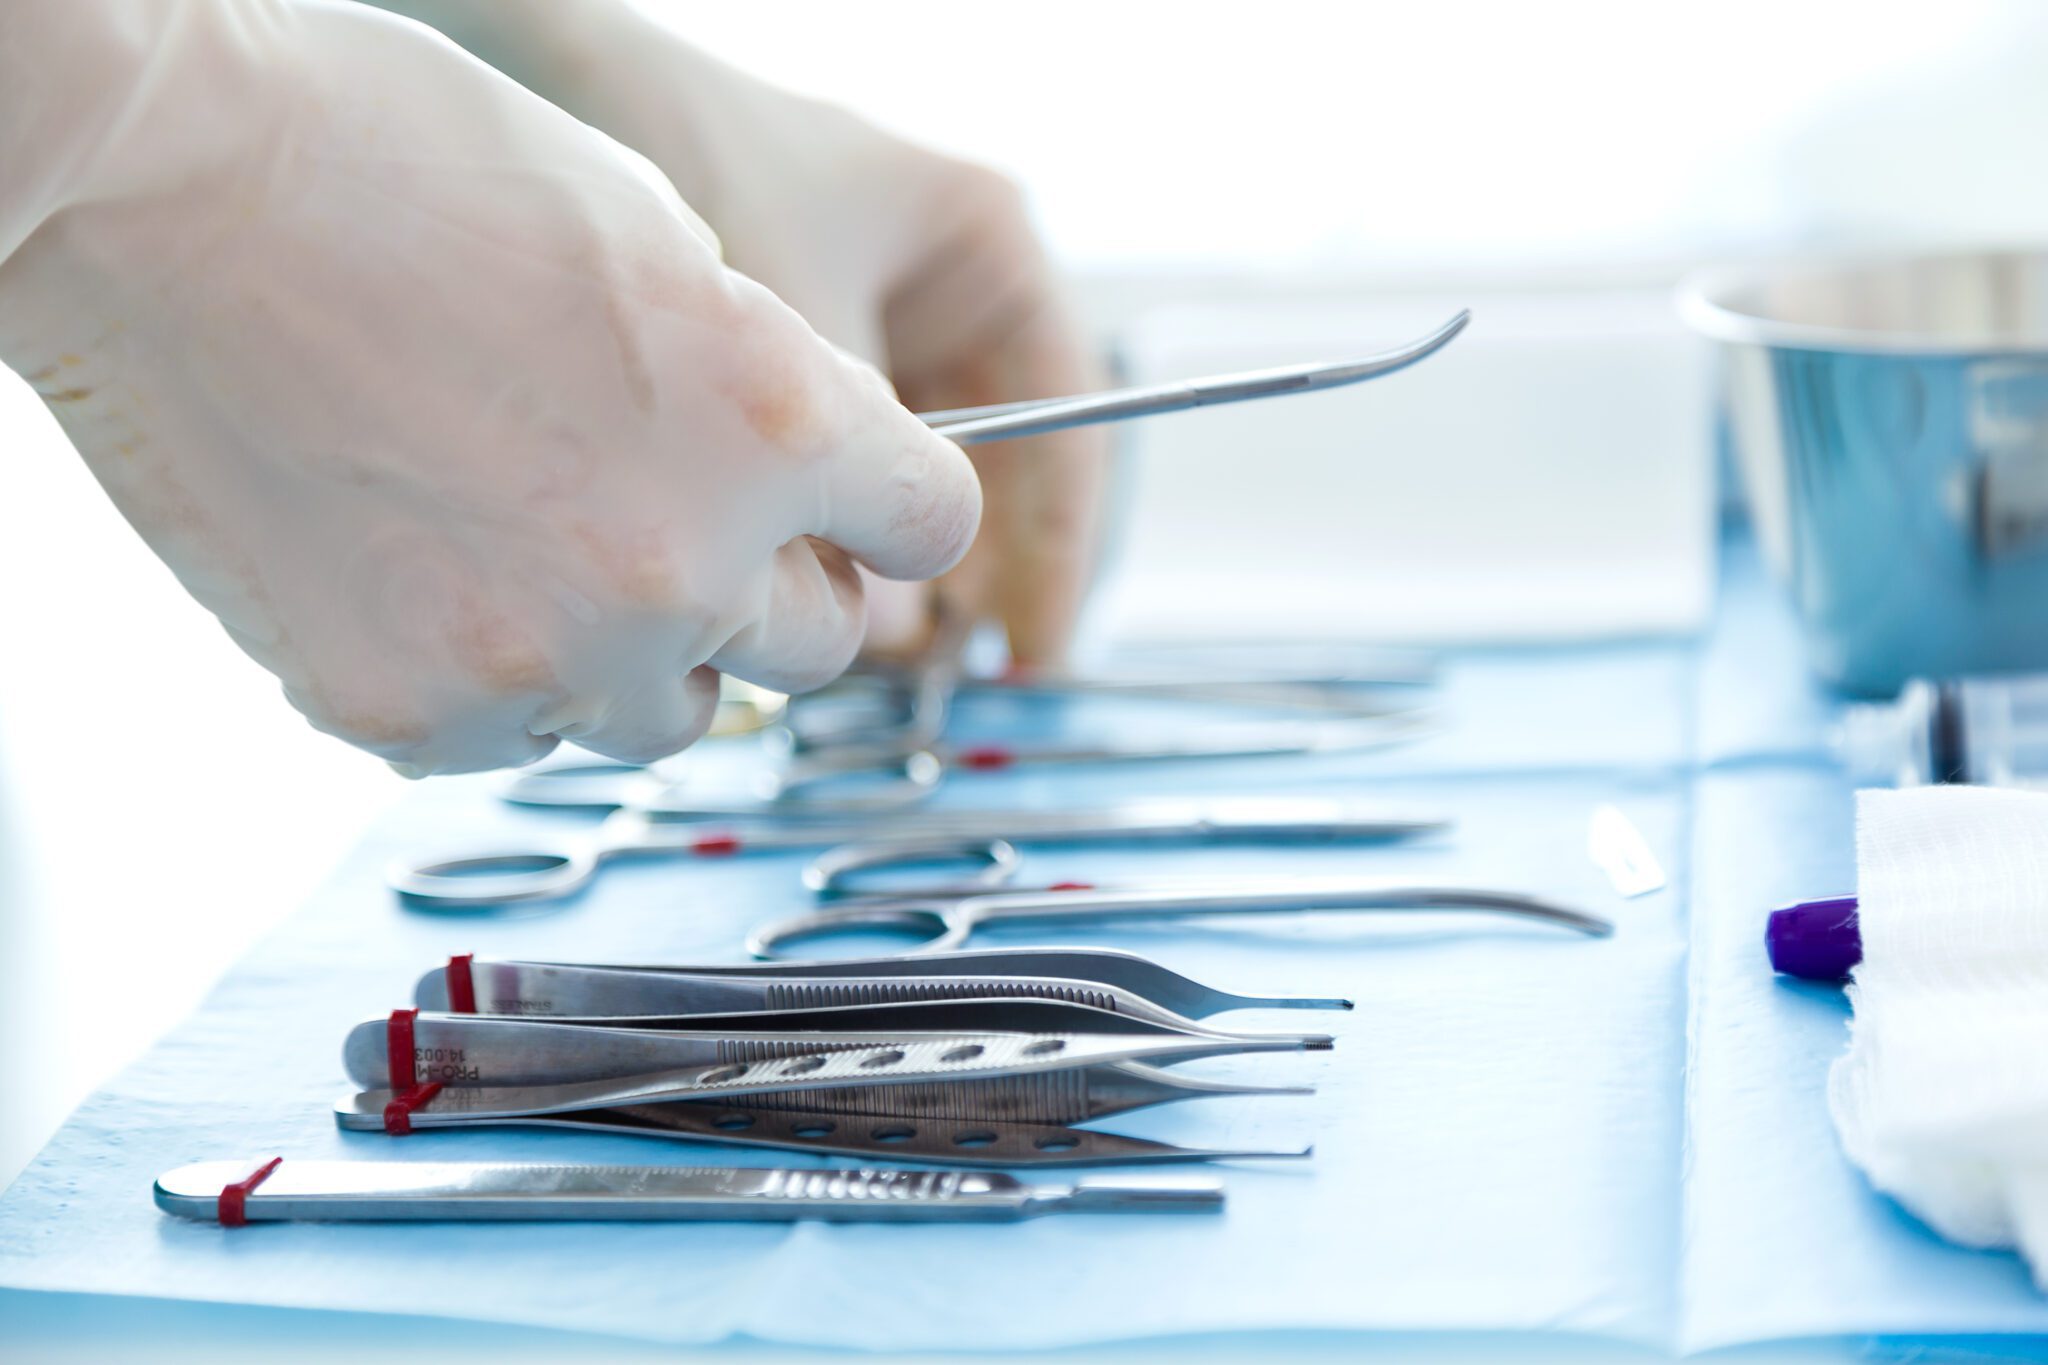 Sorting through surgical tools